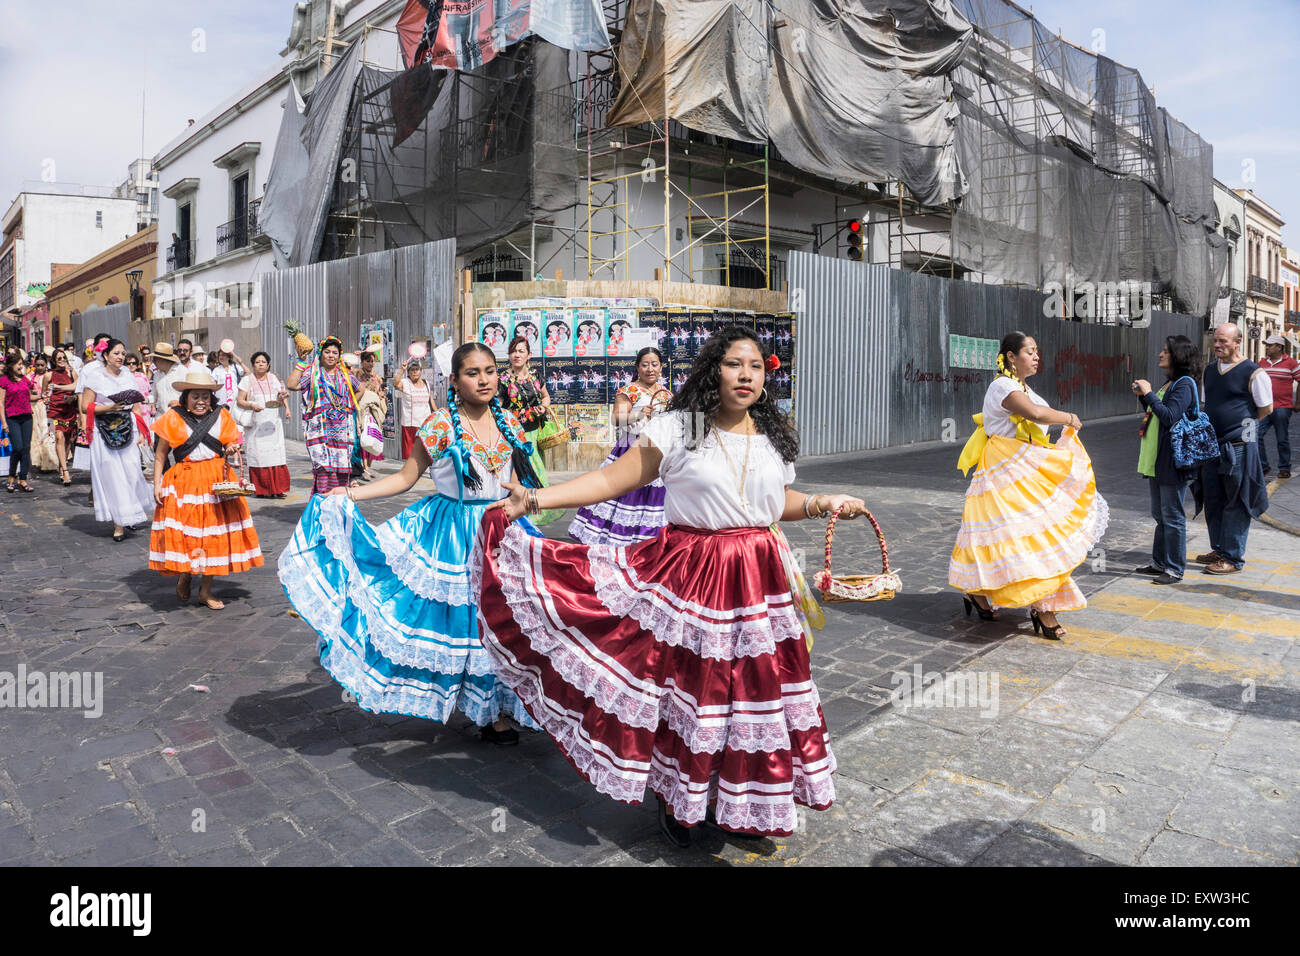 pretty Mexican indigenous women wearing brightly colored traditional costumes take part in parade in historic center of Oaxaca Stock Photo